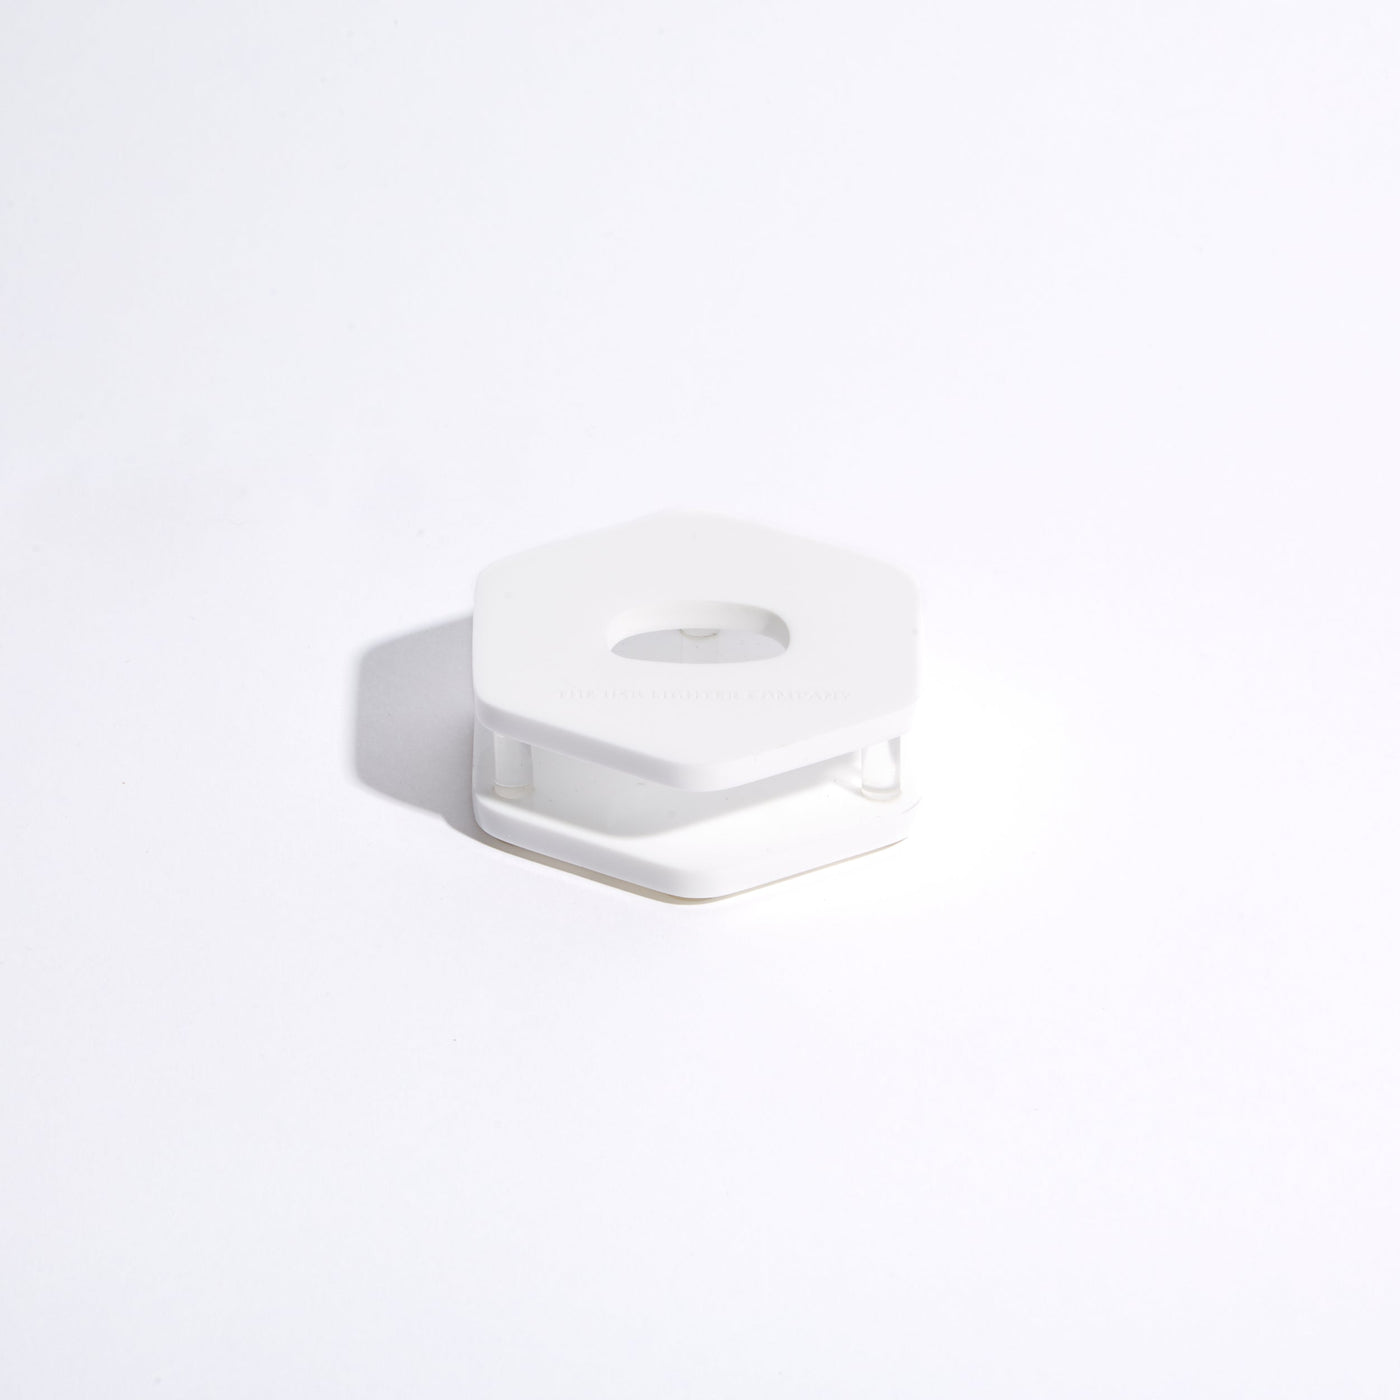 STAND - WHITE by The USB Lighter Company